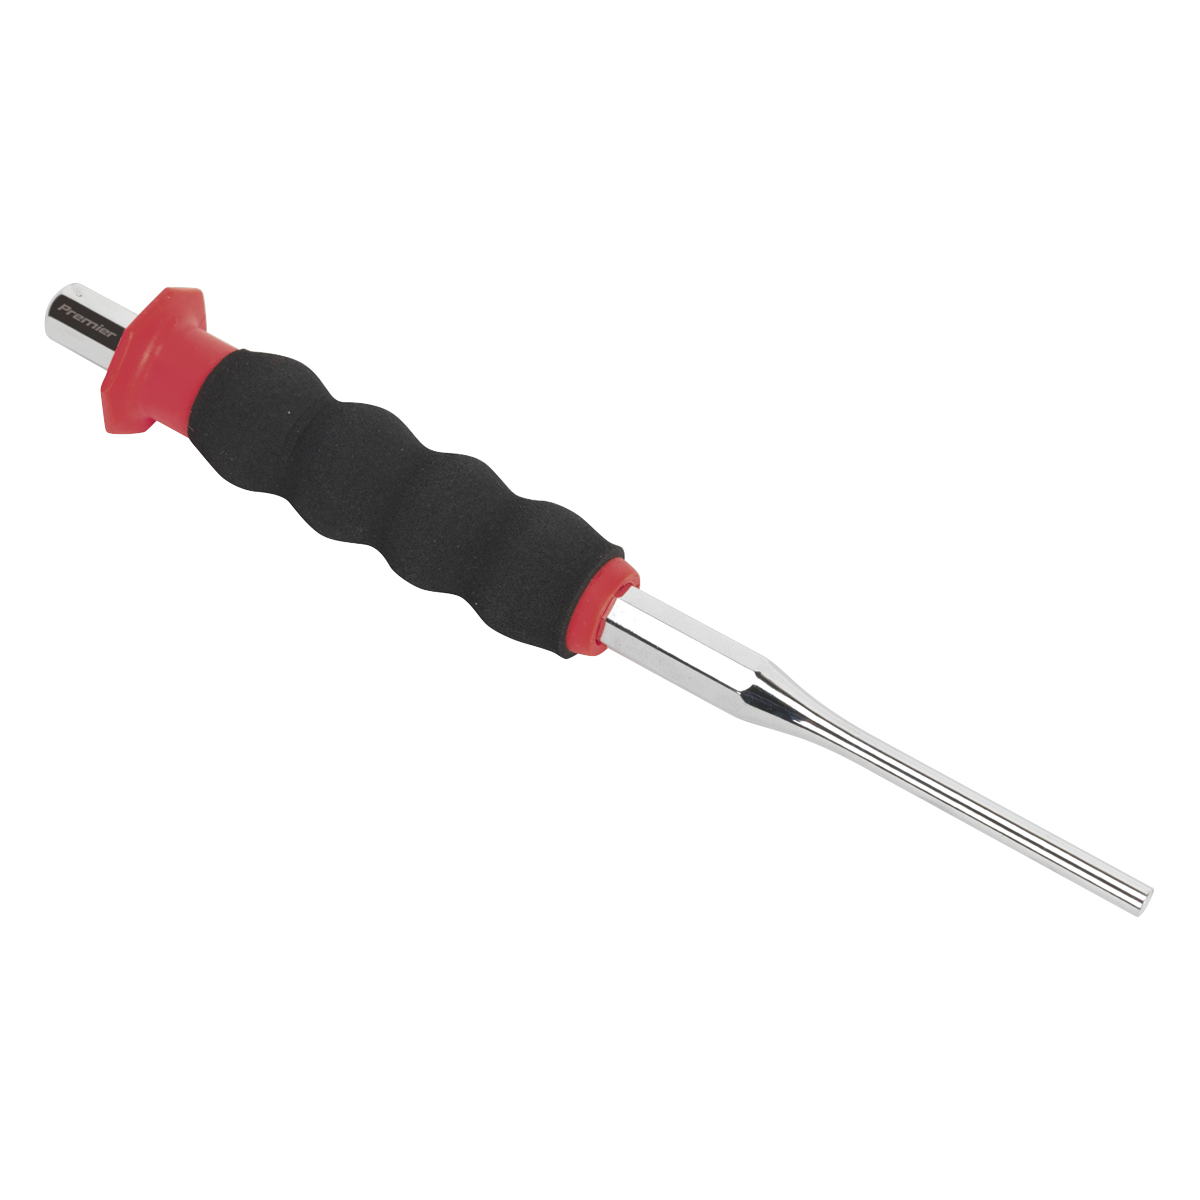 Sealey Ø5mm Sheathed Parallel Pin Punch AK91315